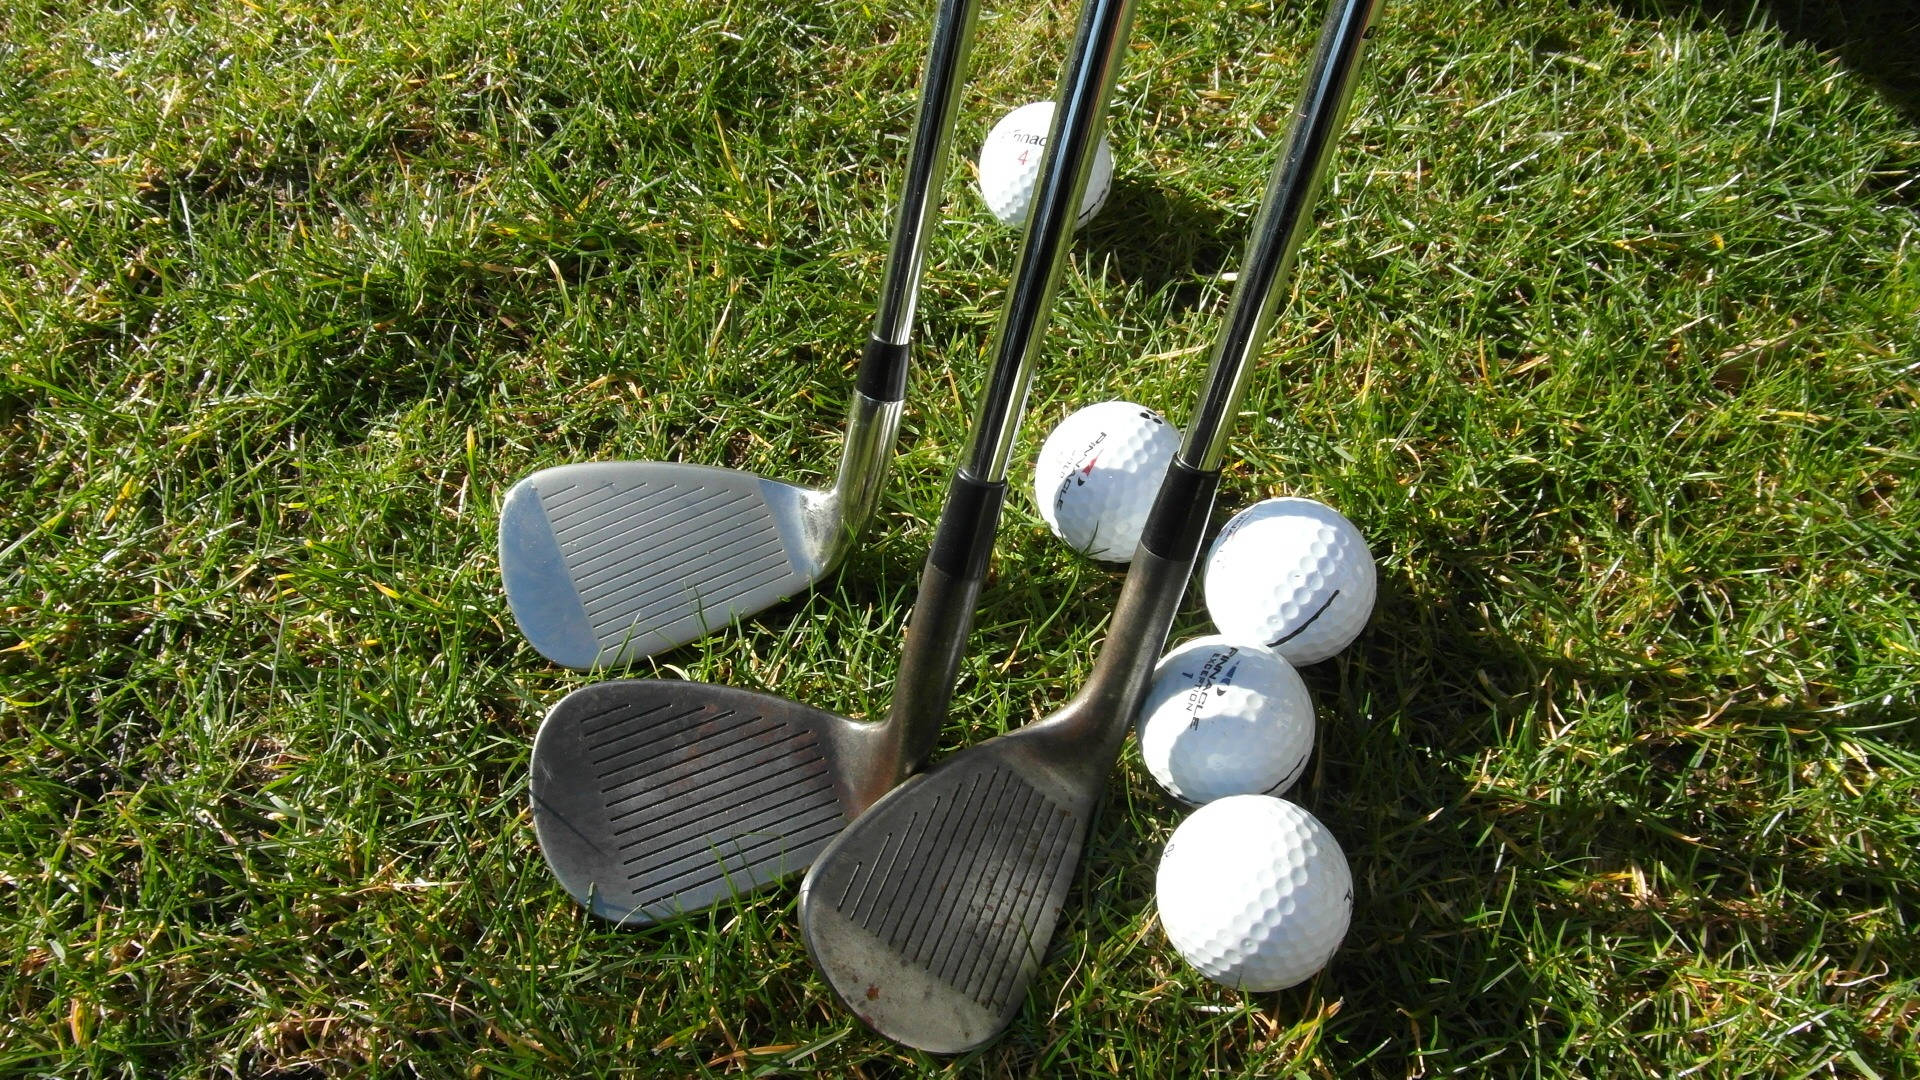 Golf Club Heads And Balls On Golf Course Background